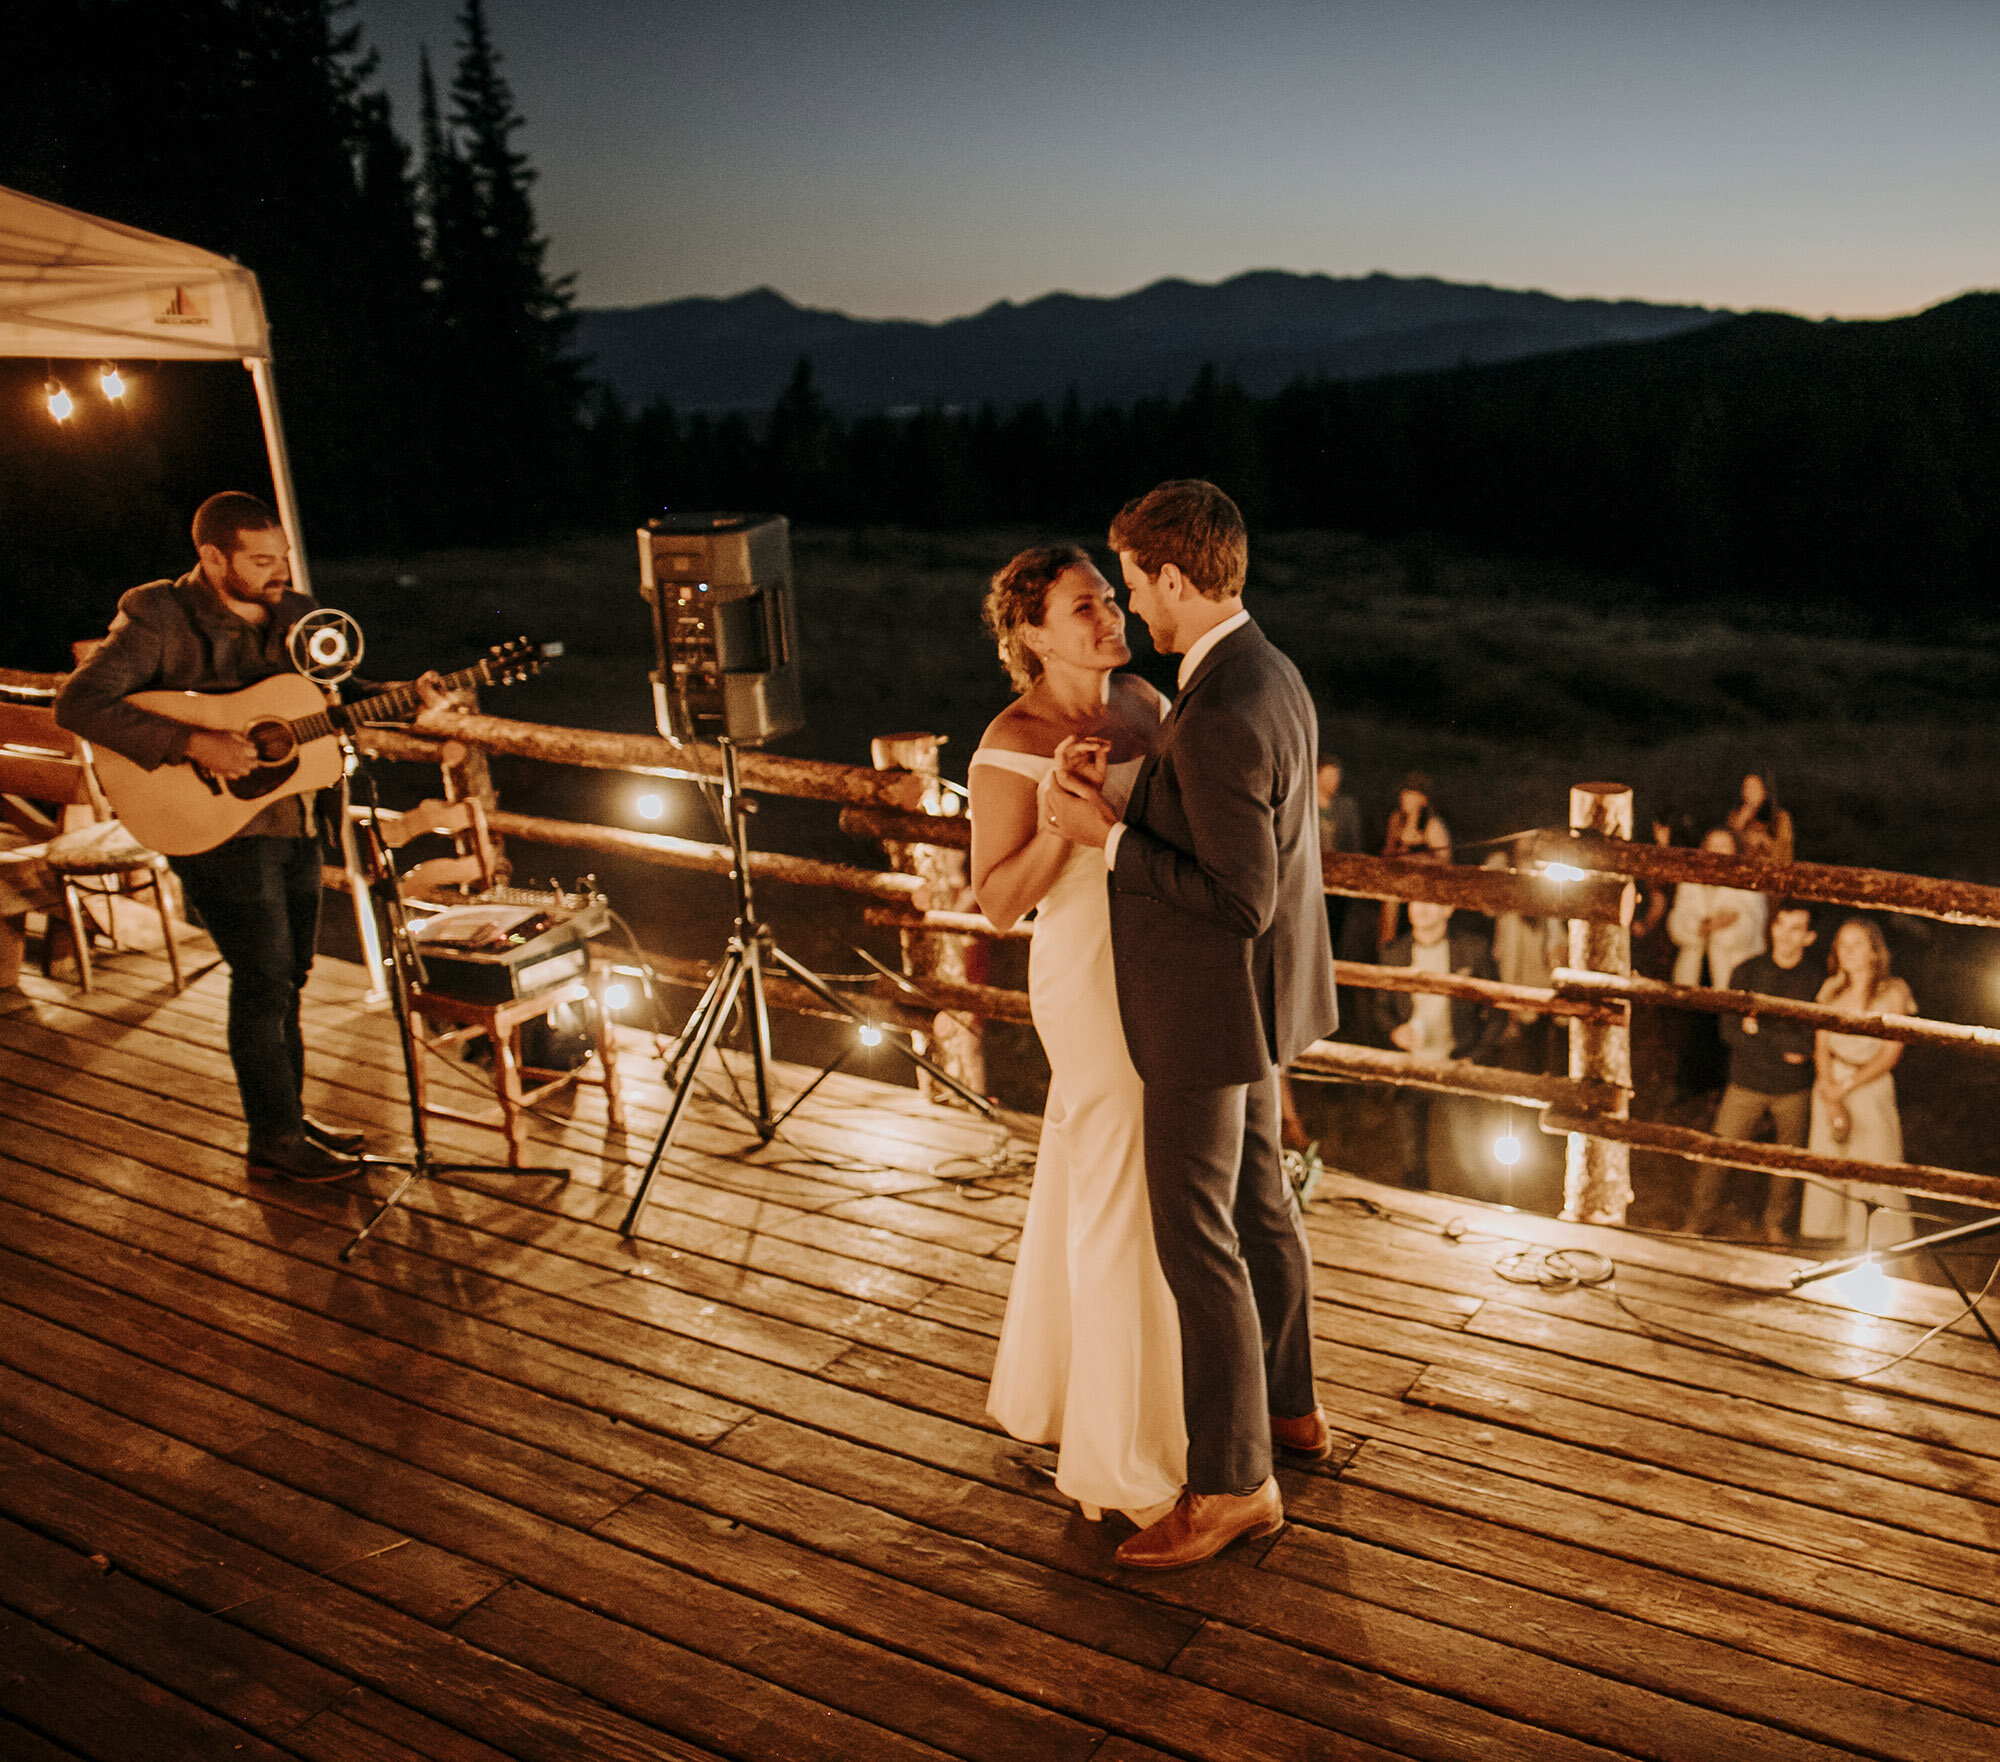  Clara and Alex were supposed to have a large wedding in Maine, but due to Covid downsized to a small event in their hometown of Leadville, Colorado. The intimate ceremony was limited to close friends and family, and they invited more friends to thei